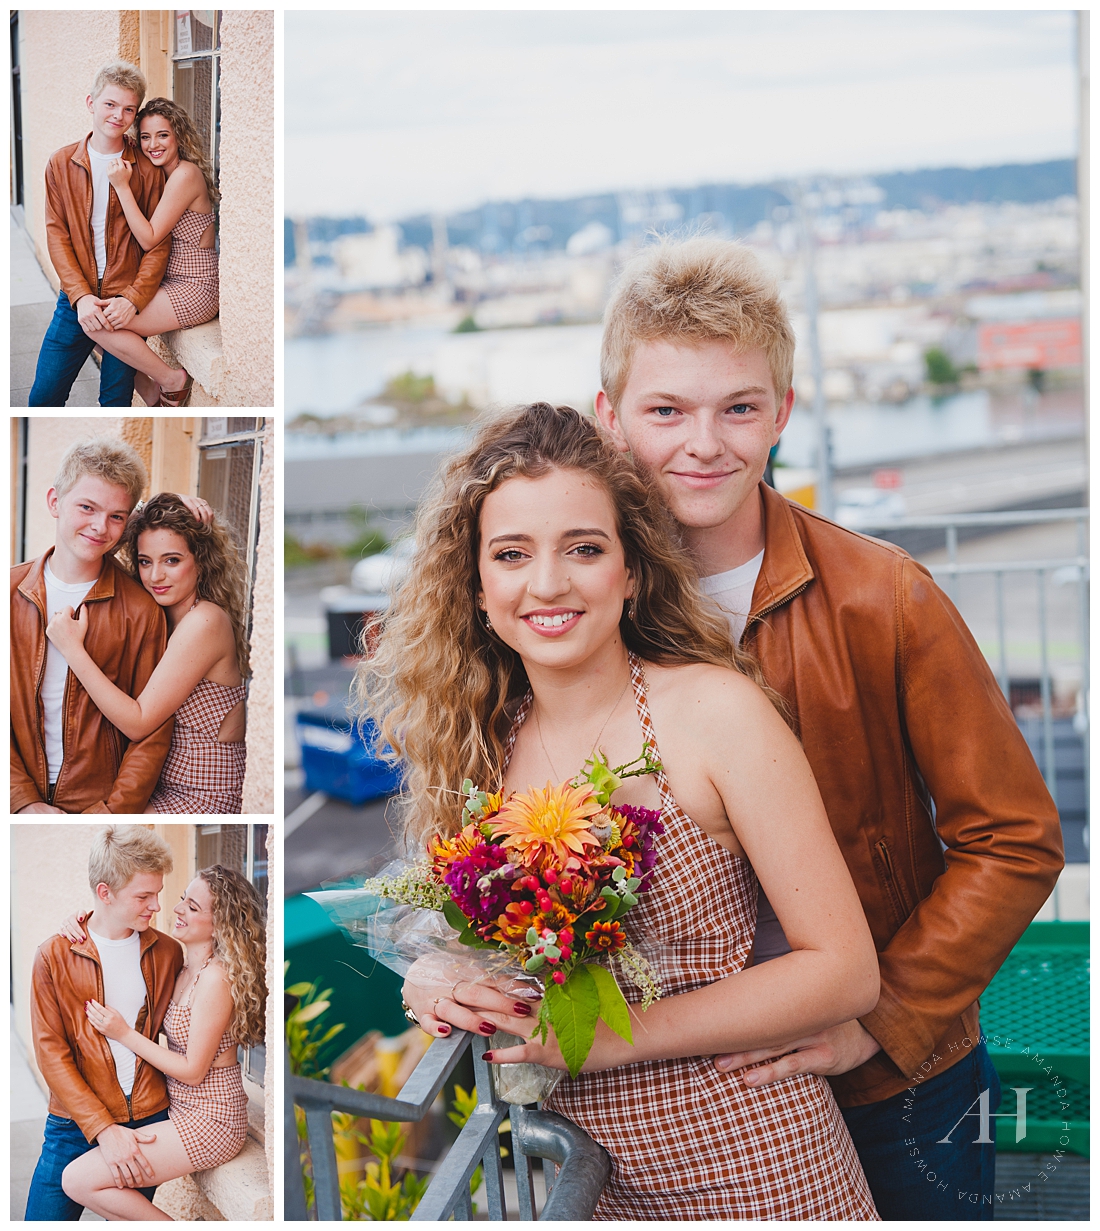 Couple Portraits with Matching Outfits and Fresh Flowers | Amanda Howse Photography